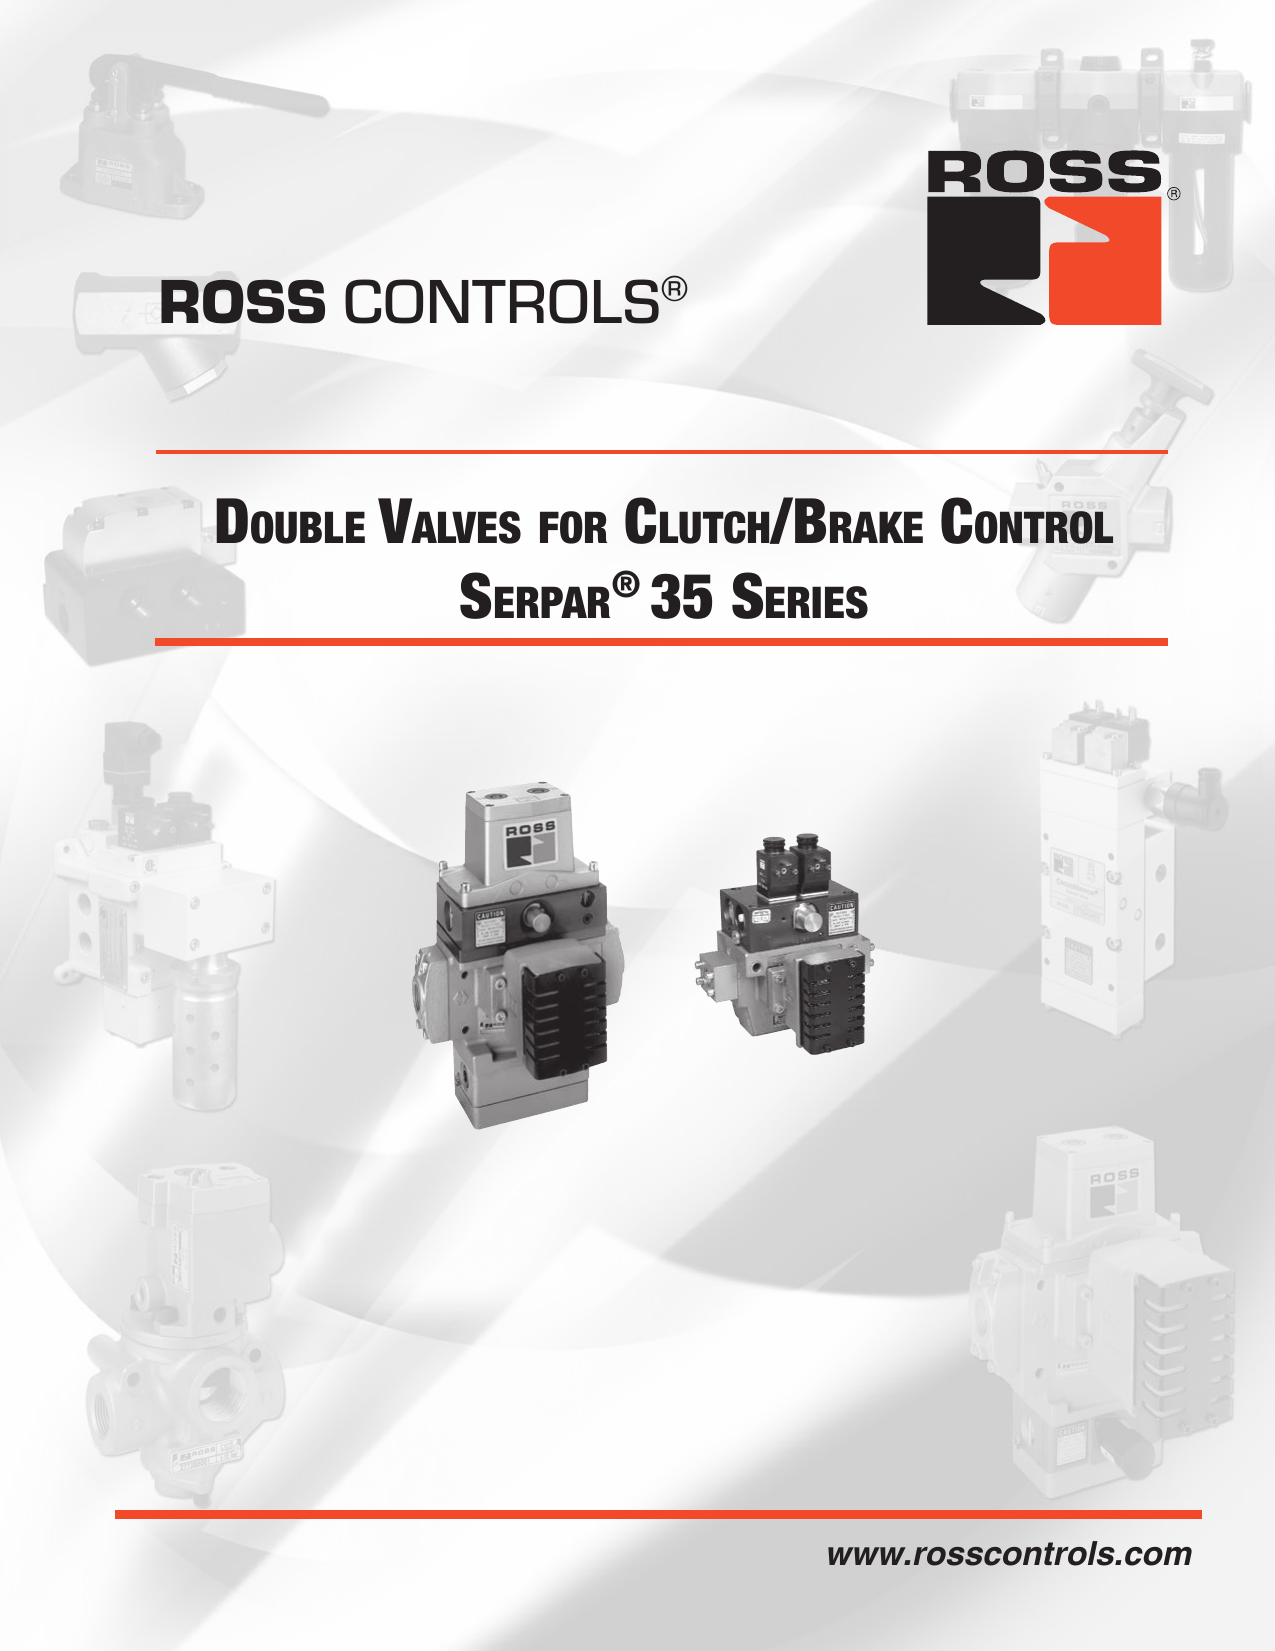 No Override Single Signal Input Ross Controls D3573A6181Z 35/SERPAR Series Solenoid Controlled Valve Ports 1 BSPP 110 VAC Ports 1 BSPP 110 VAC Dynamic Monitoring Memory E-P Monitor Type